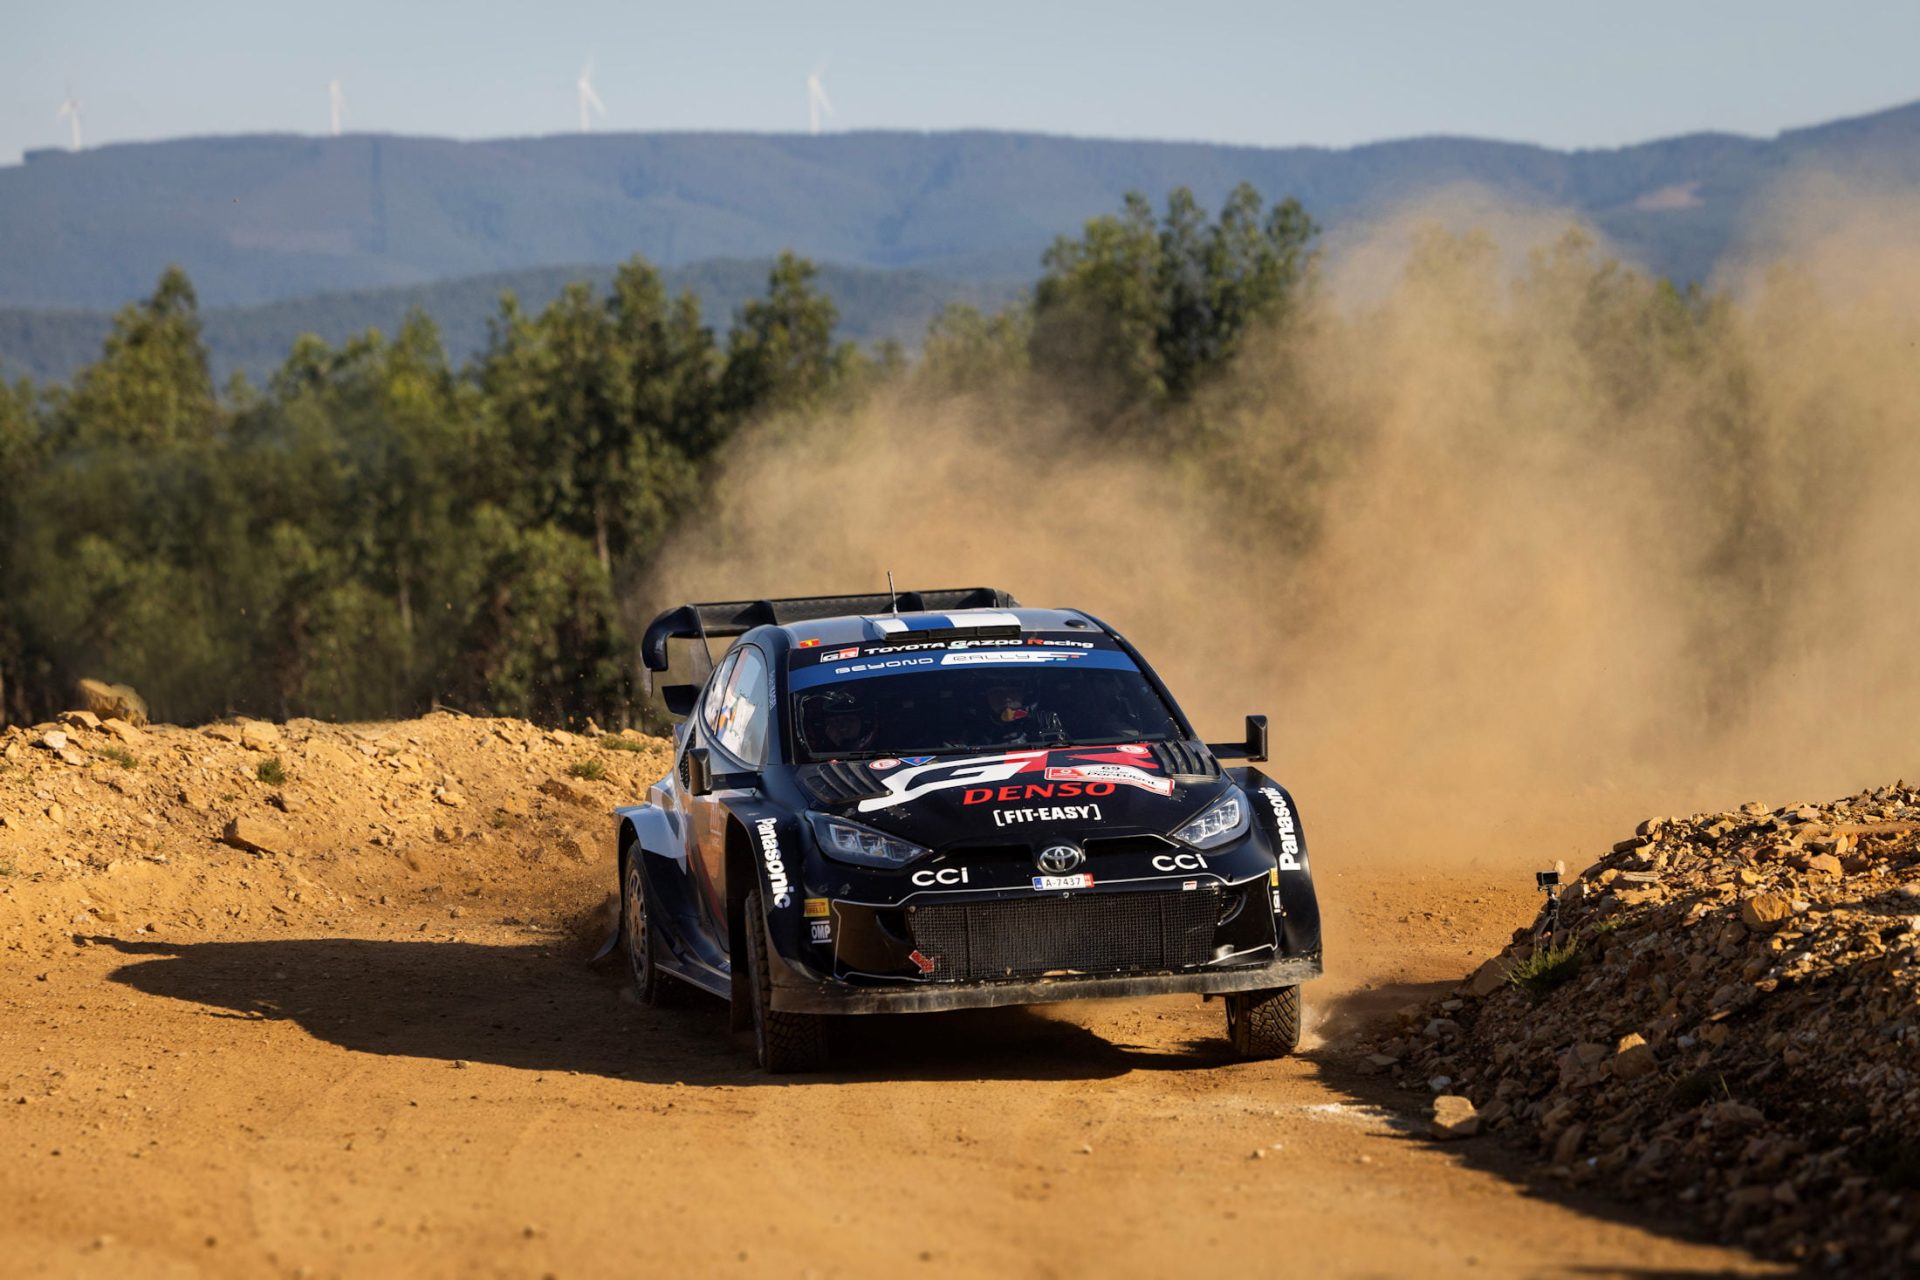 Rovanpera and Solberg roll out of Rally de Portugal